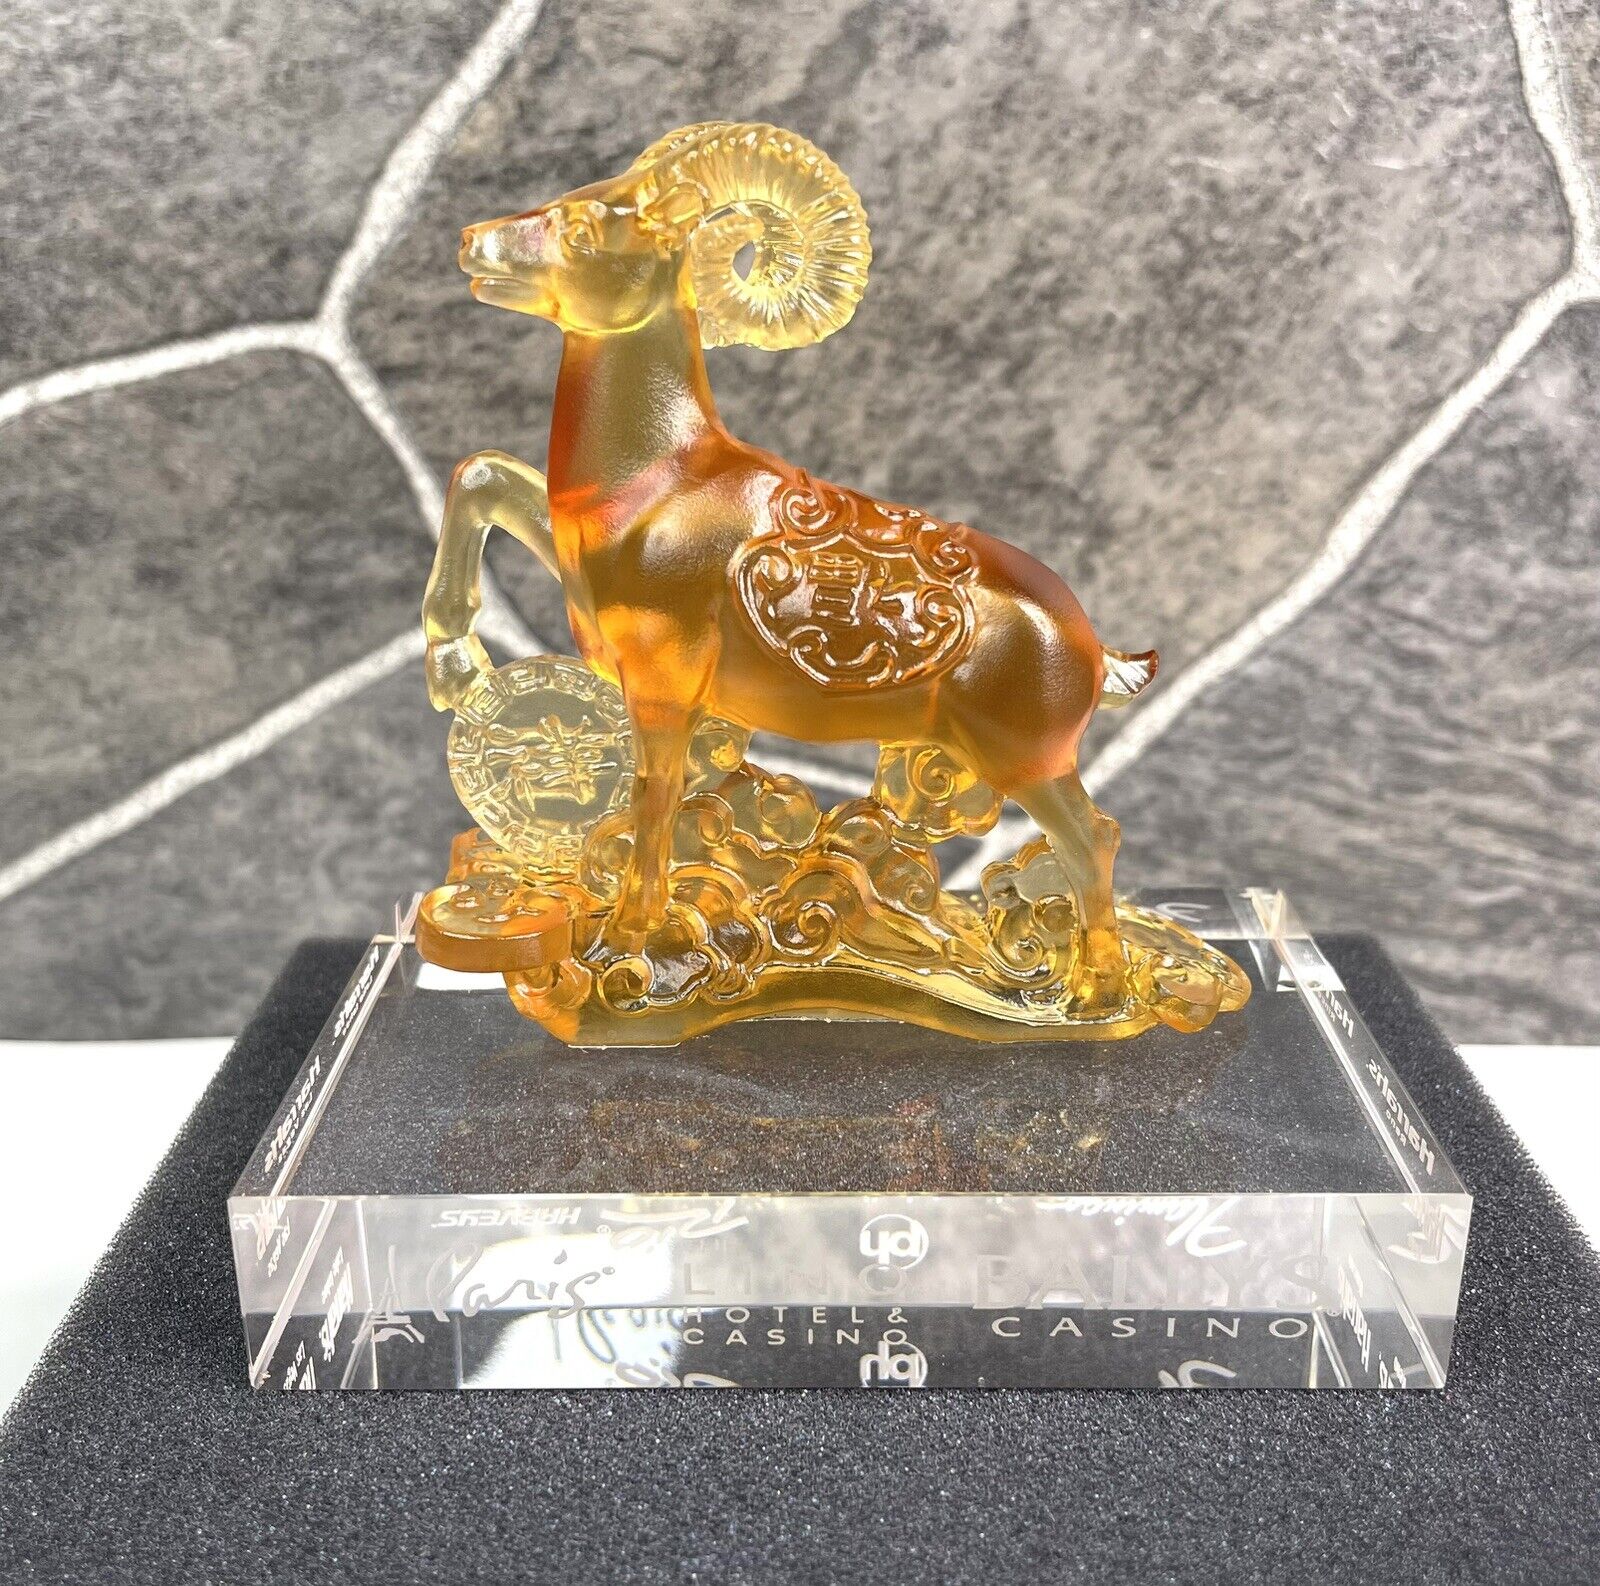 Caesars Palace Las Vegas Casino Year Of The Goat Yang Limited Edition Statue